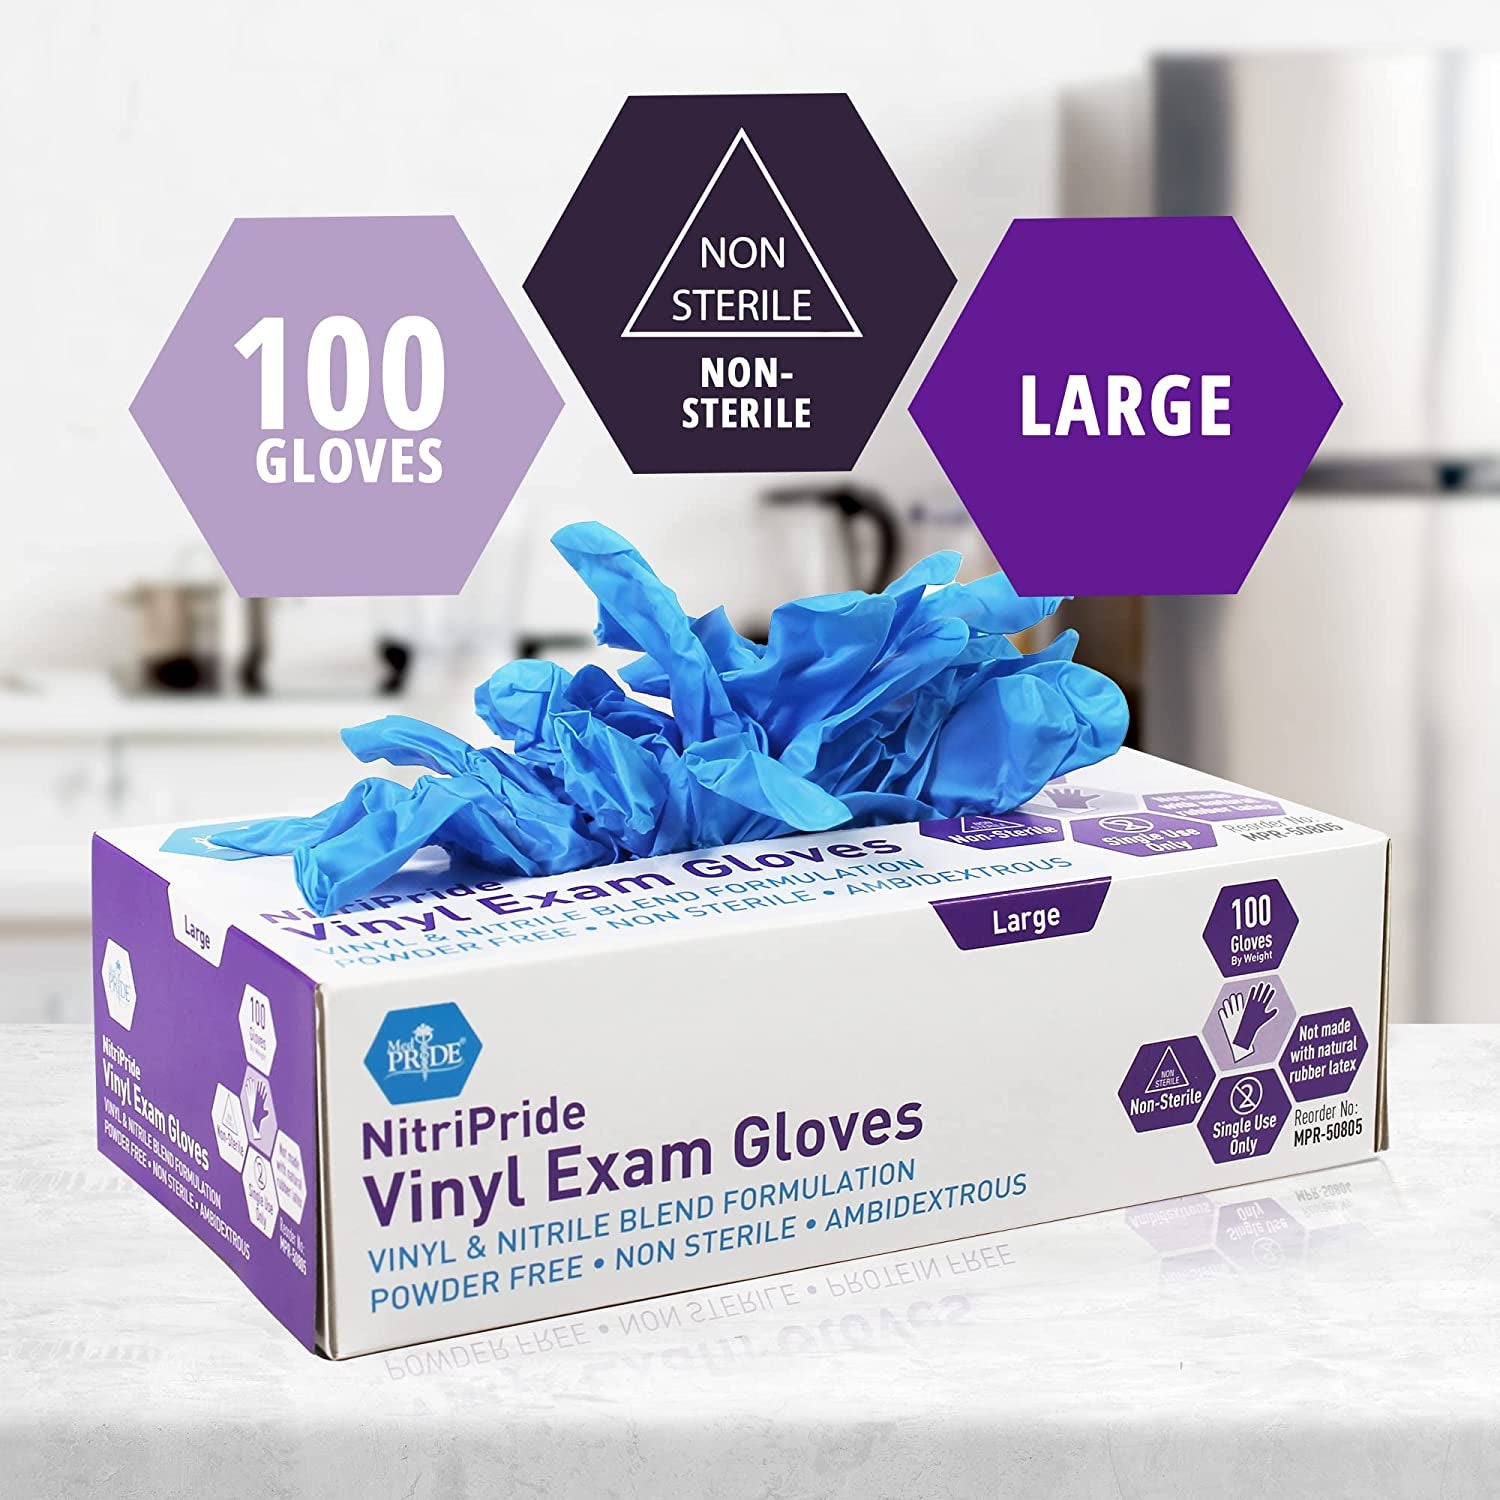 Nitripride Nitrile-Vinyl Blend Exam Gloves, Large 100 - Powder Free, Latex Free & Rubber Free - Single Use Non-Sterile Protective Gloves for Medical Use, Cooking, Cleaning & More